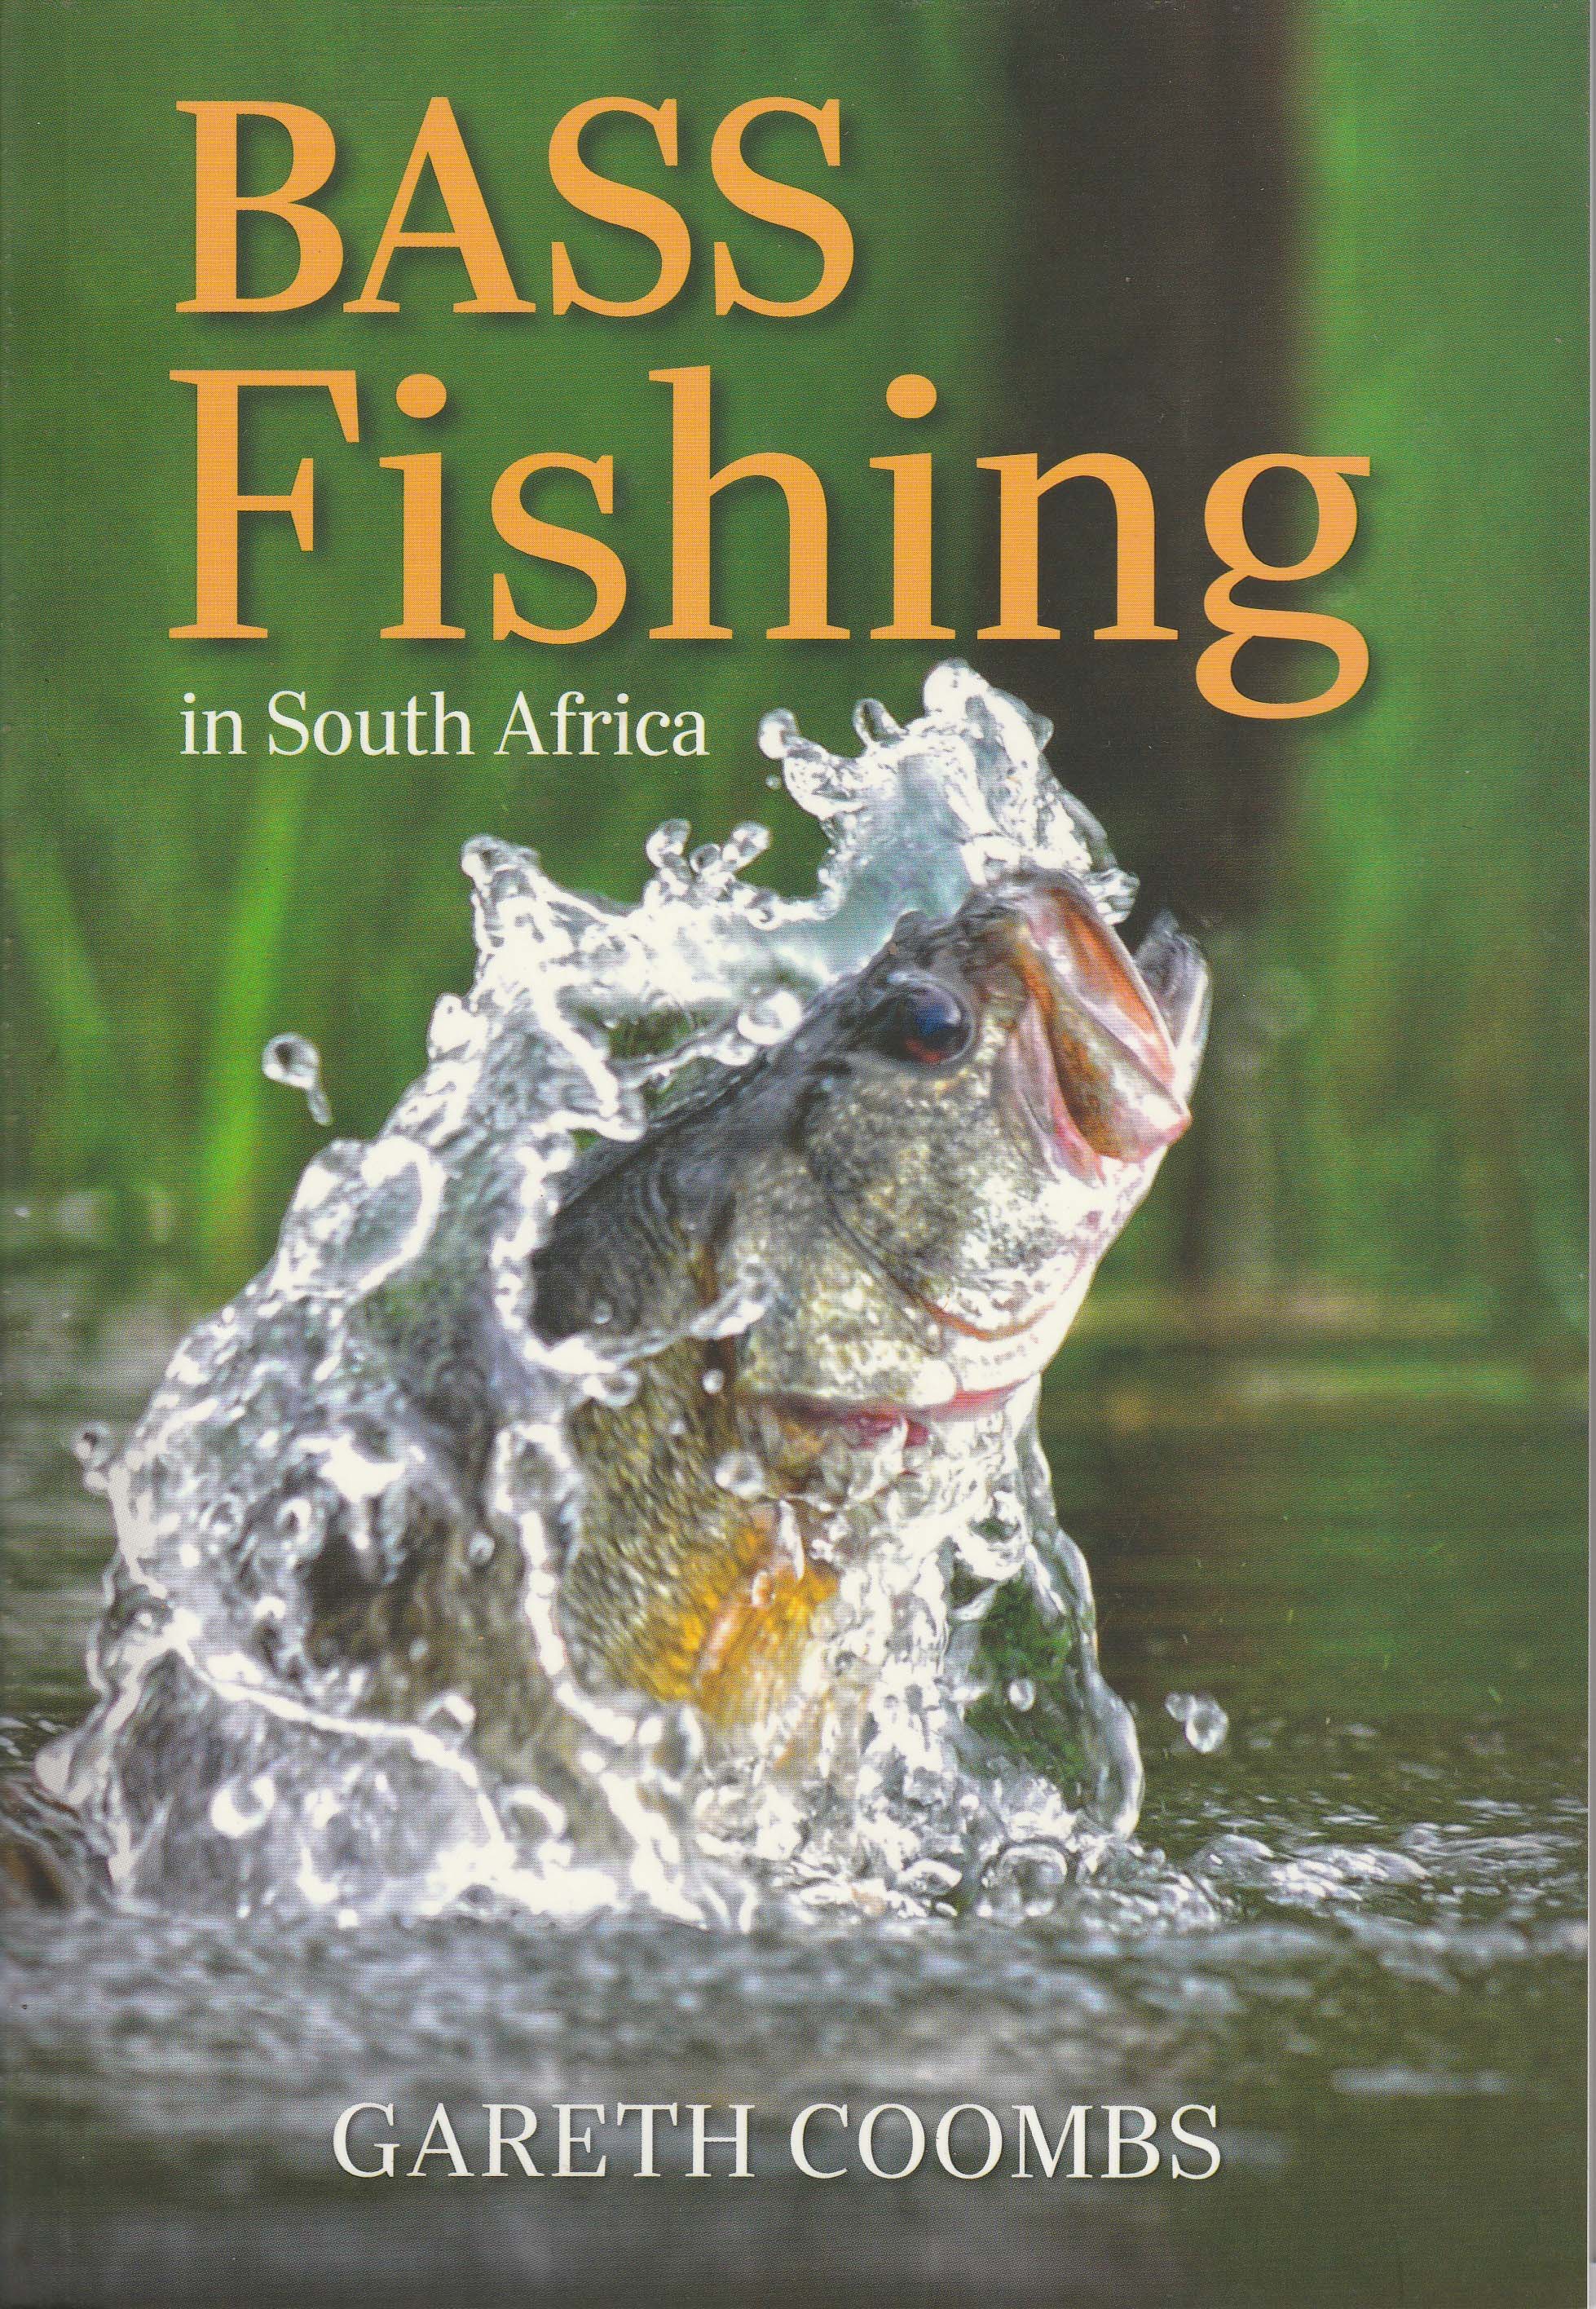 Bass fishing in South Africa book cover